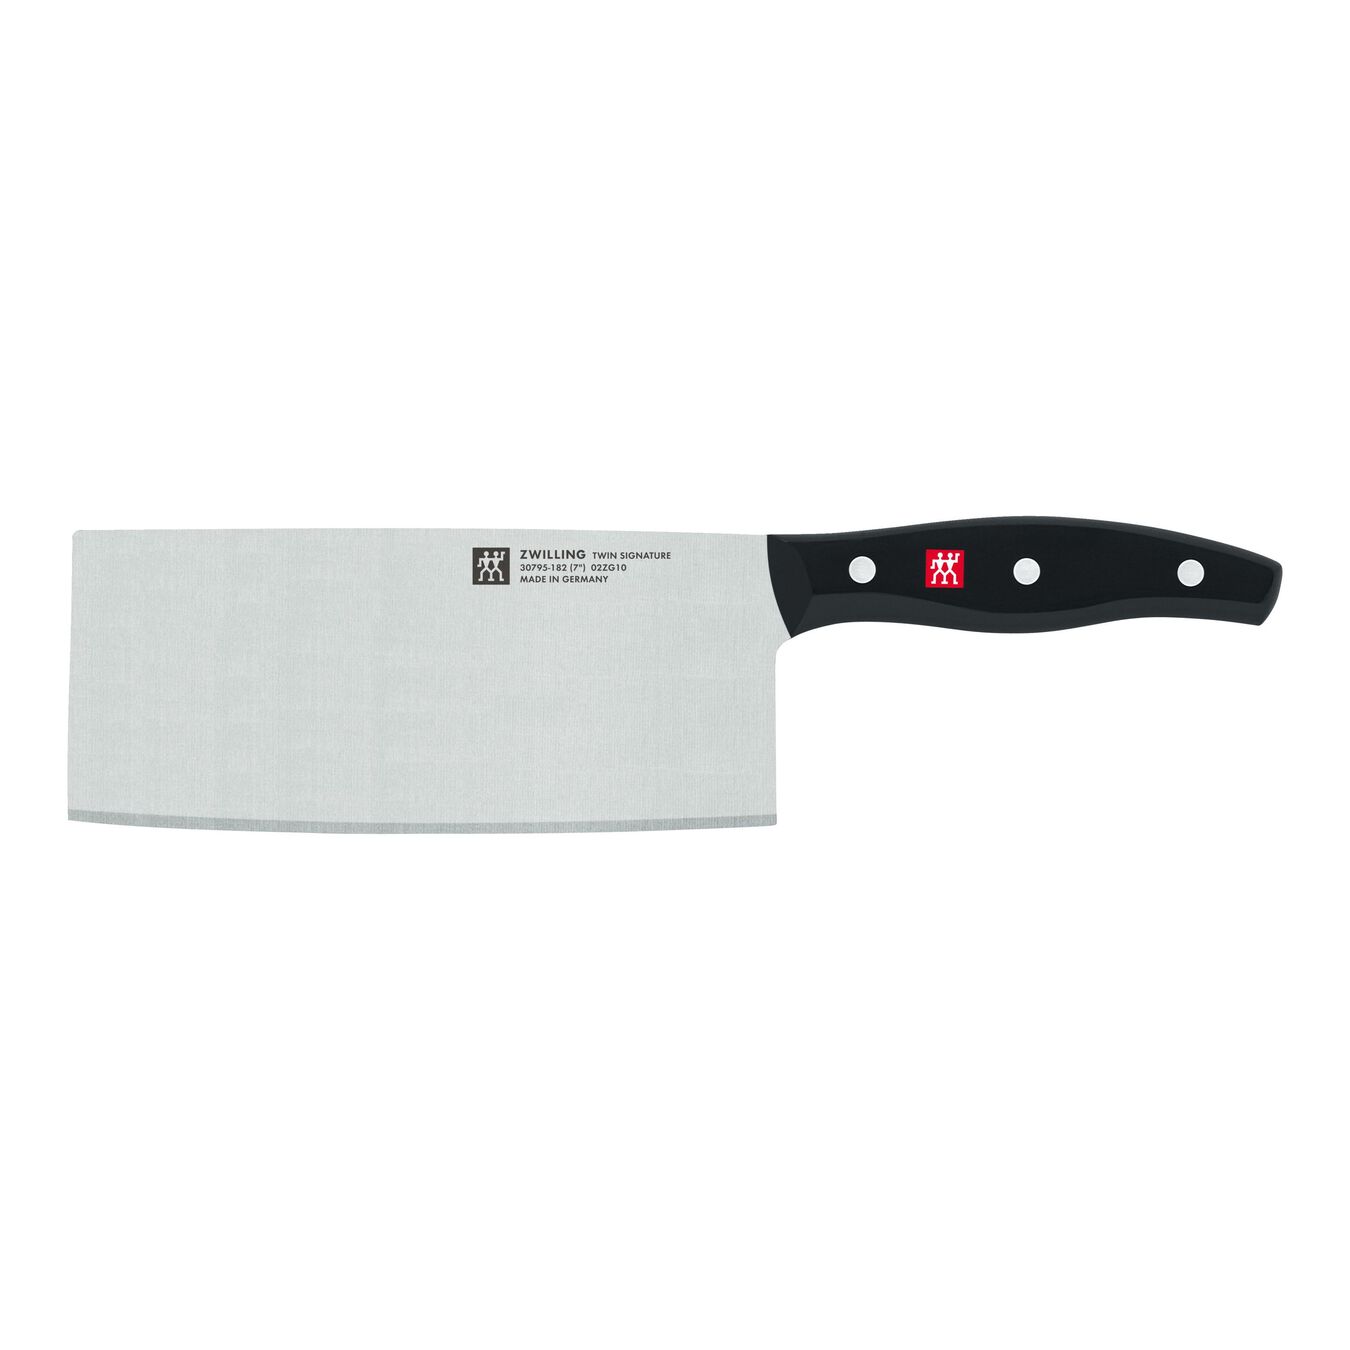 7-inch, Chinese Chef's Knife/Vegetable Cleaver,,large 1